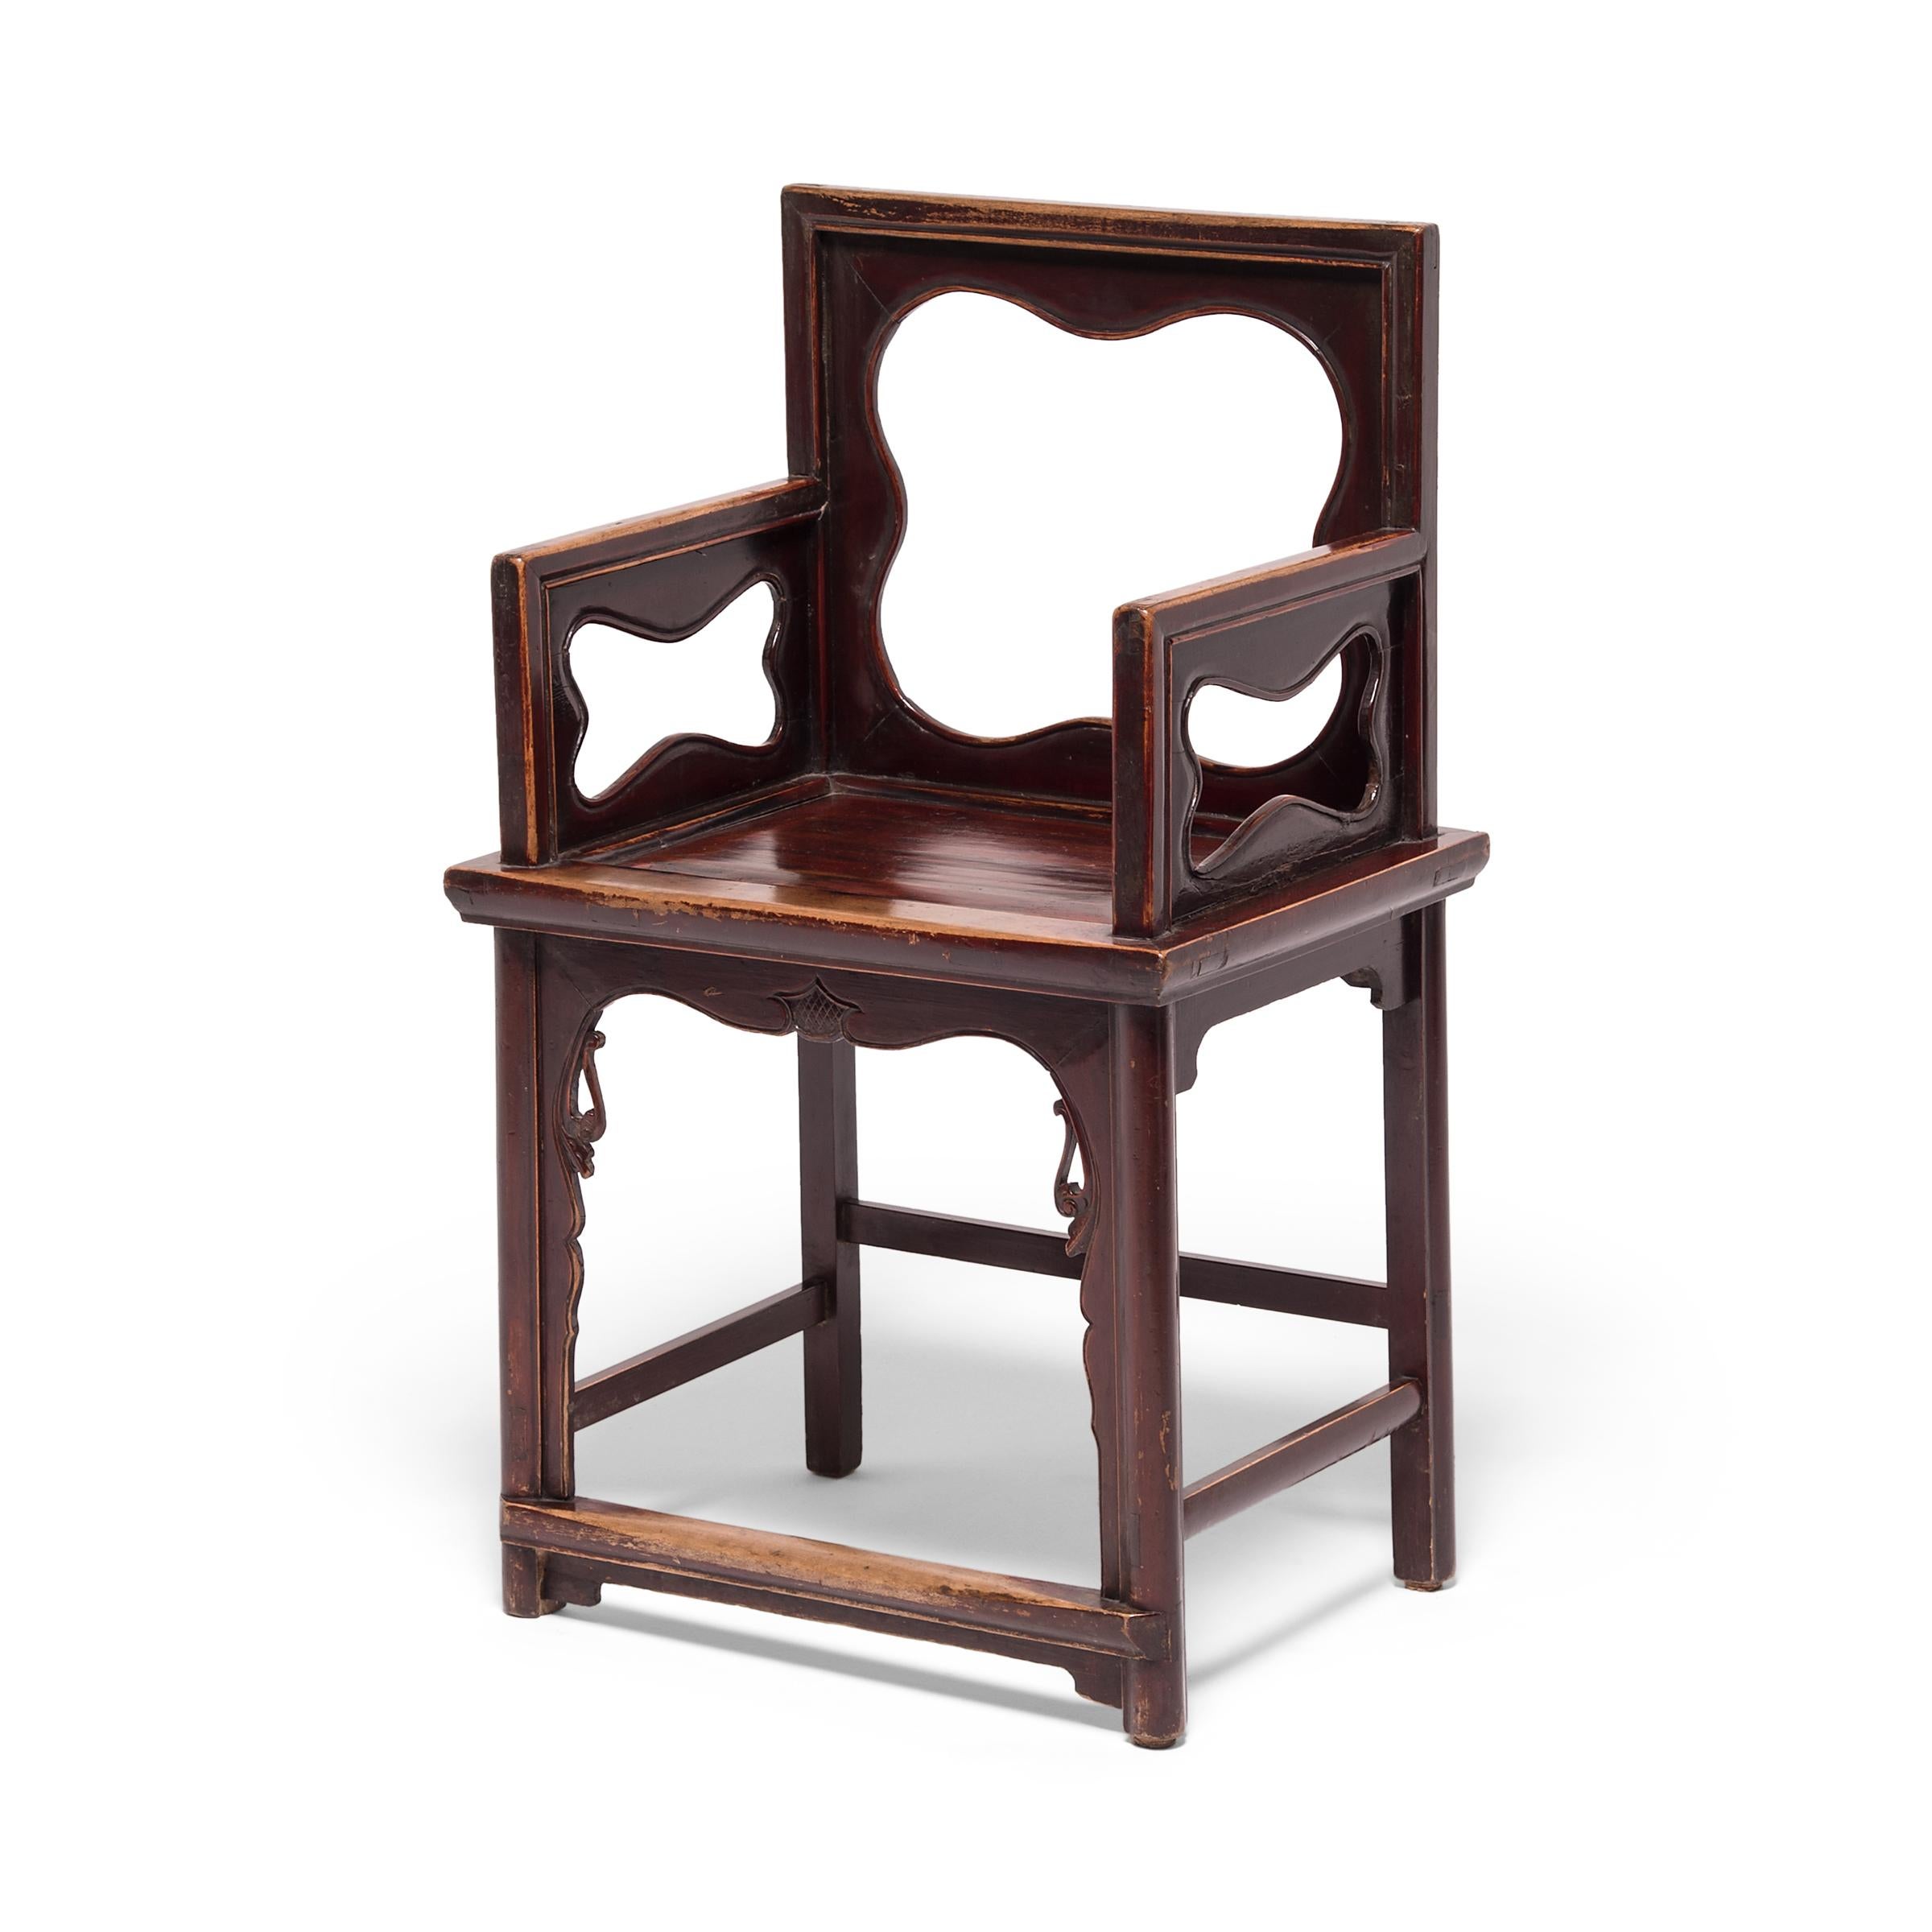 Qing Pair of Chinese Rose Chairs with Quatrefoil Cutouts, c. 1850 For Sale